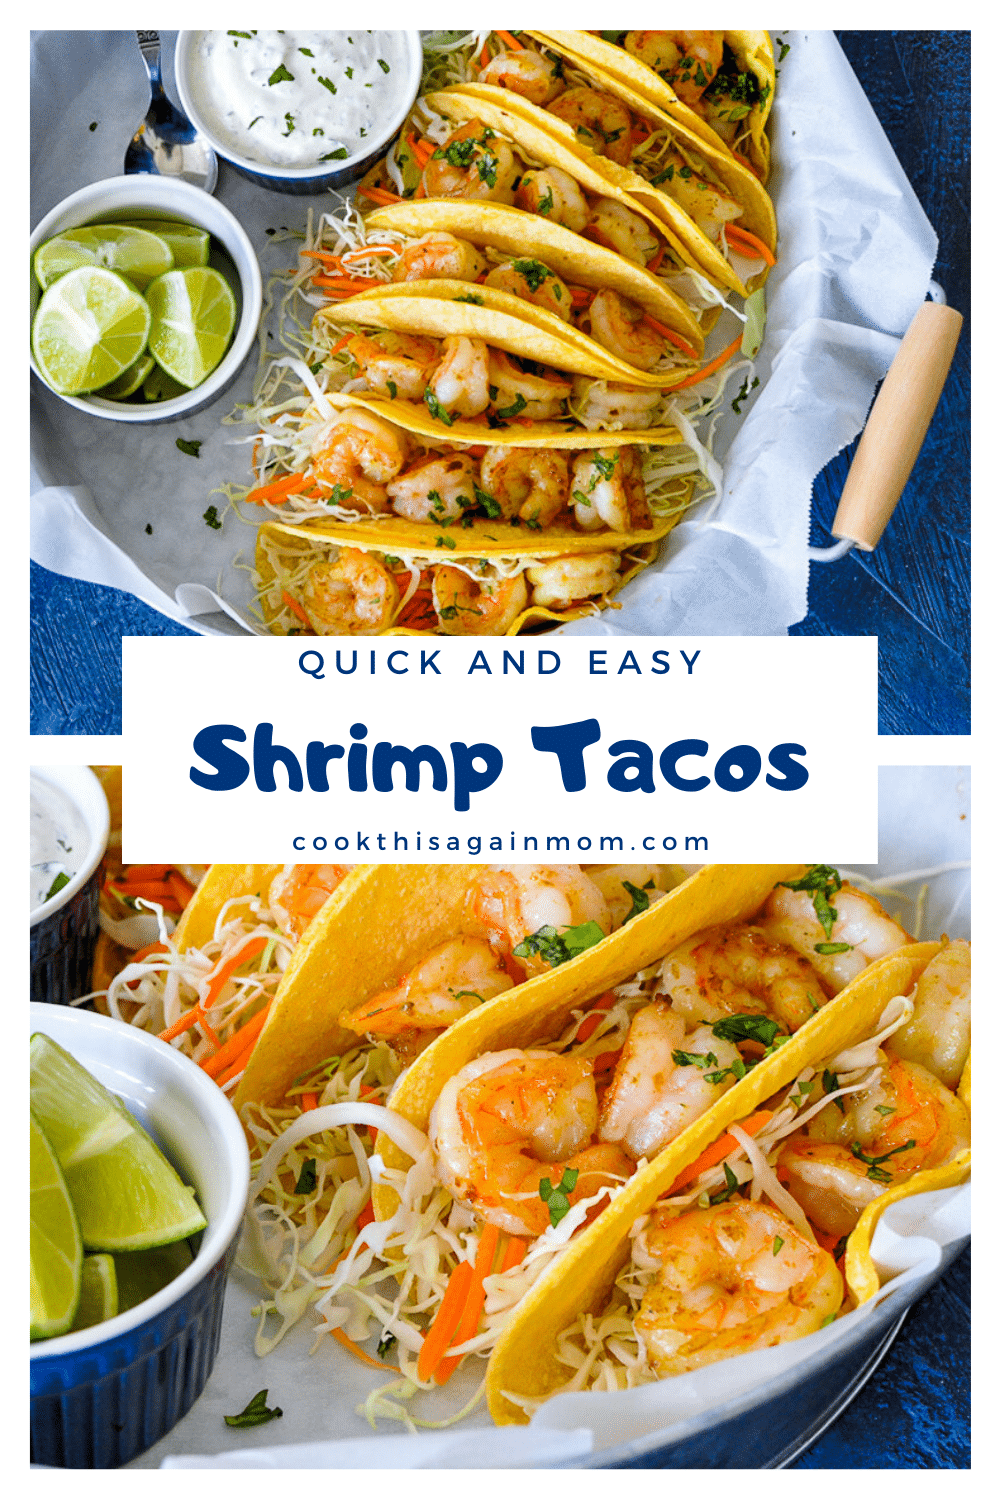 Quick and Easy Shrimp Tacos - Cook This Again Mom